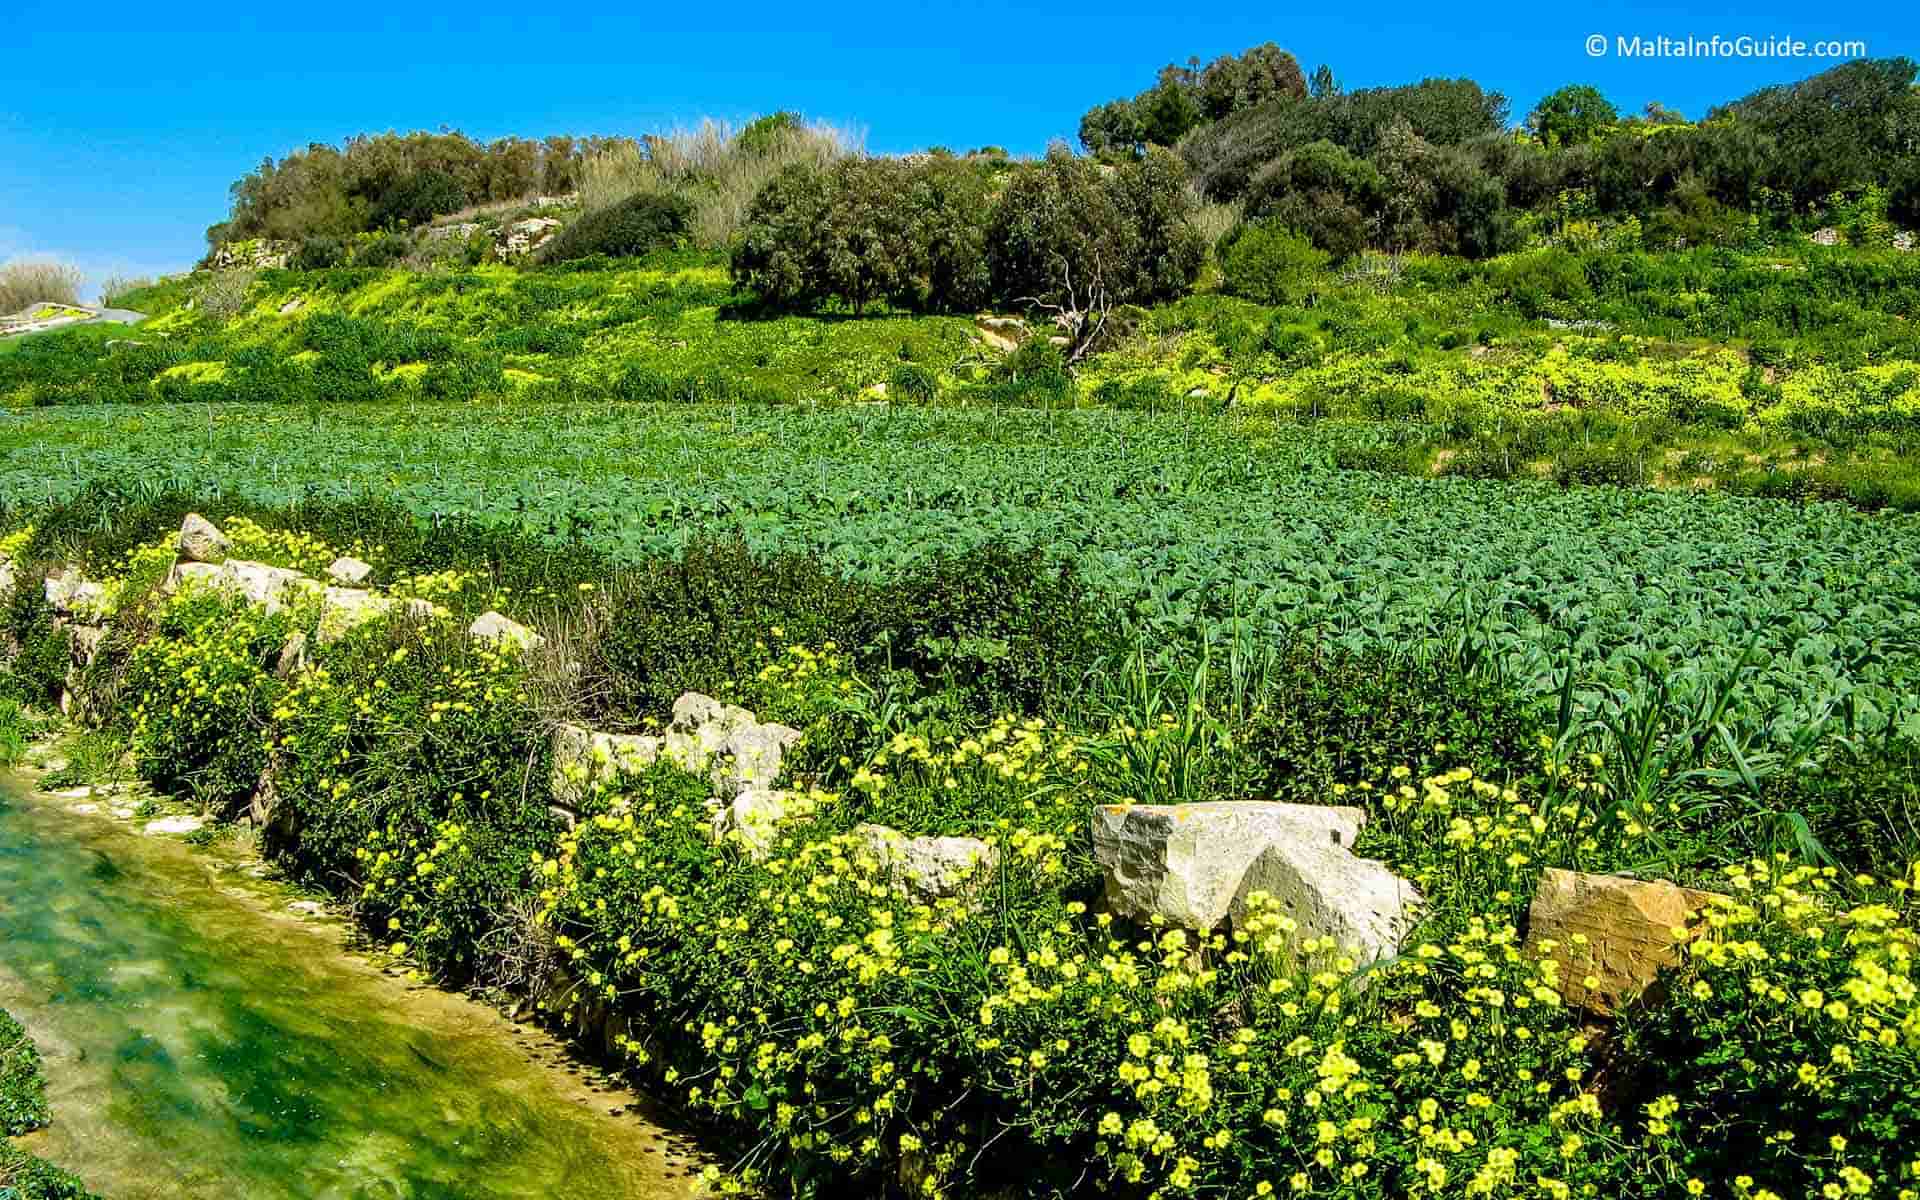 Beautiful weather in Malta greenery after a heavy rainstorm.